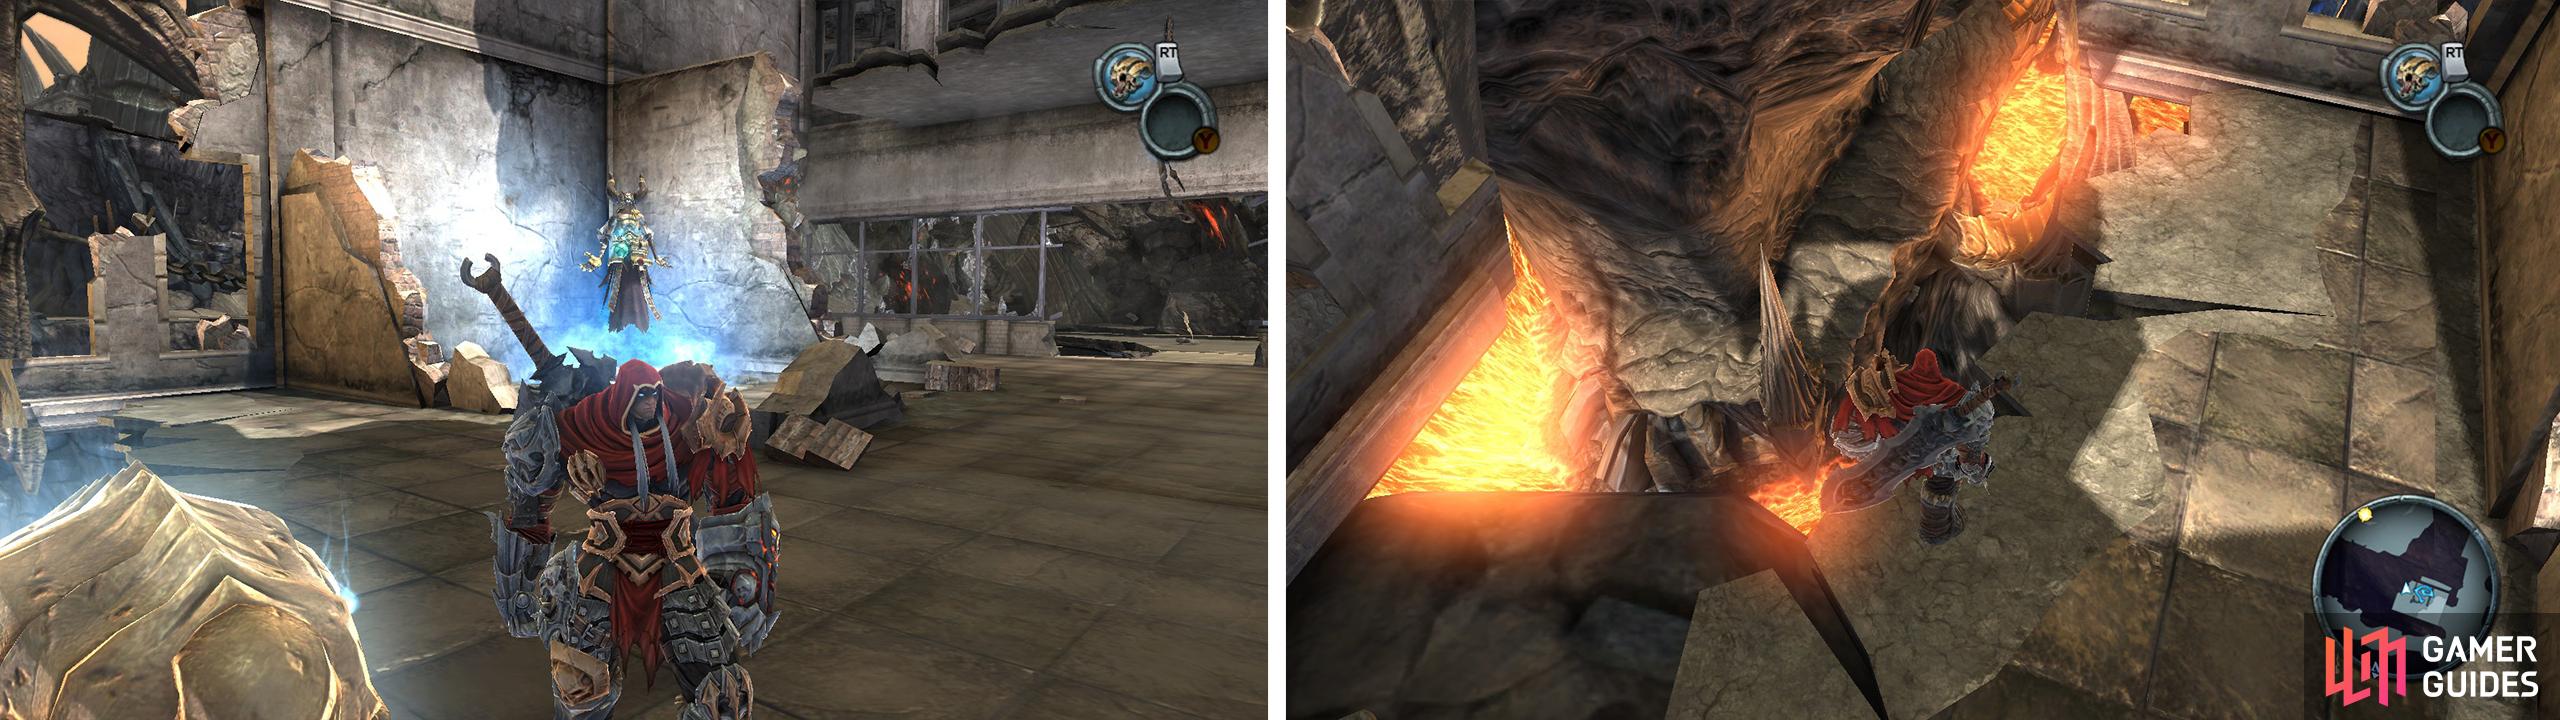 From the Vulgrim Location (Left) find the ruined wall and use shadowflight to glide down to the hidden path below (right).